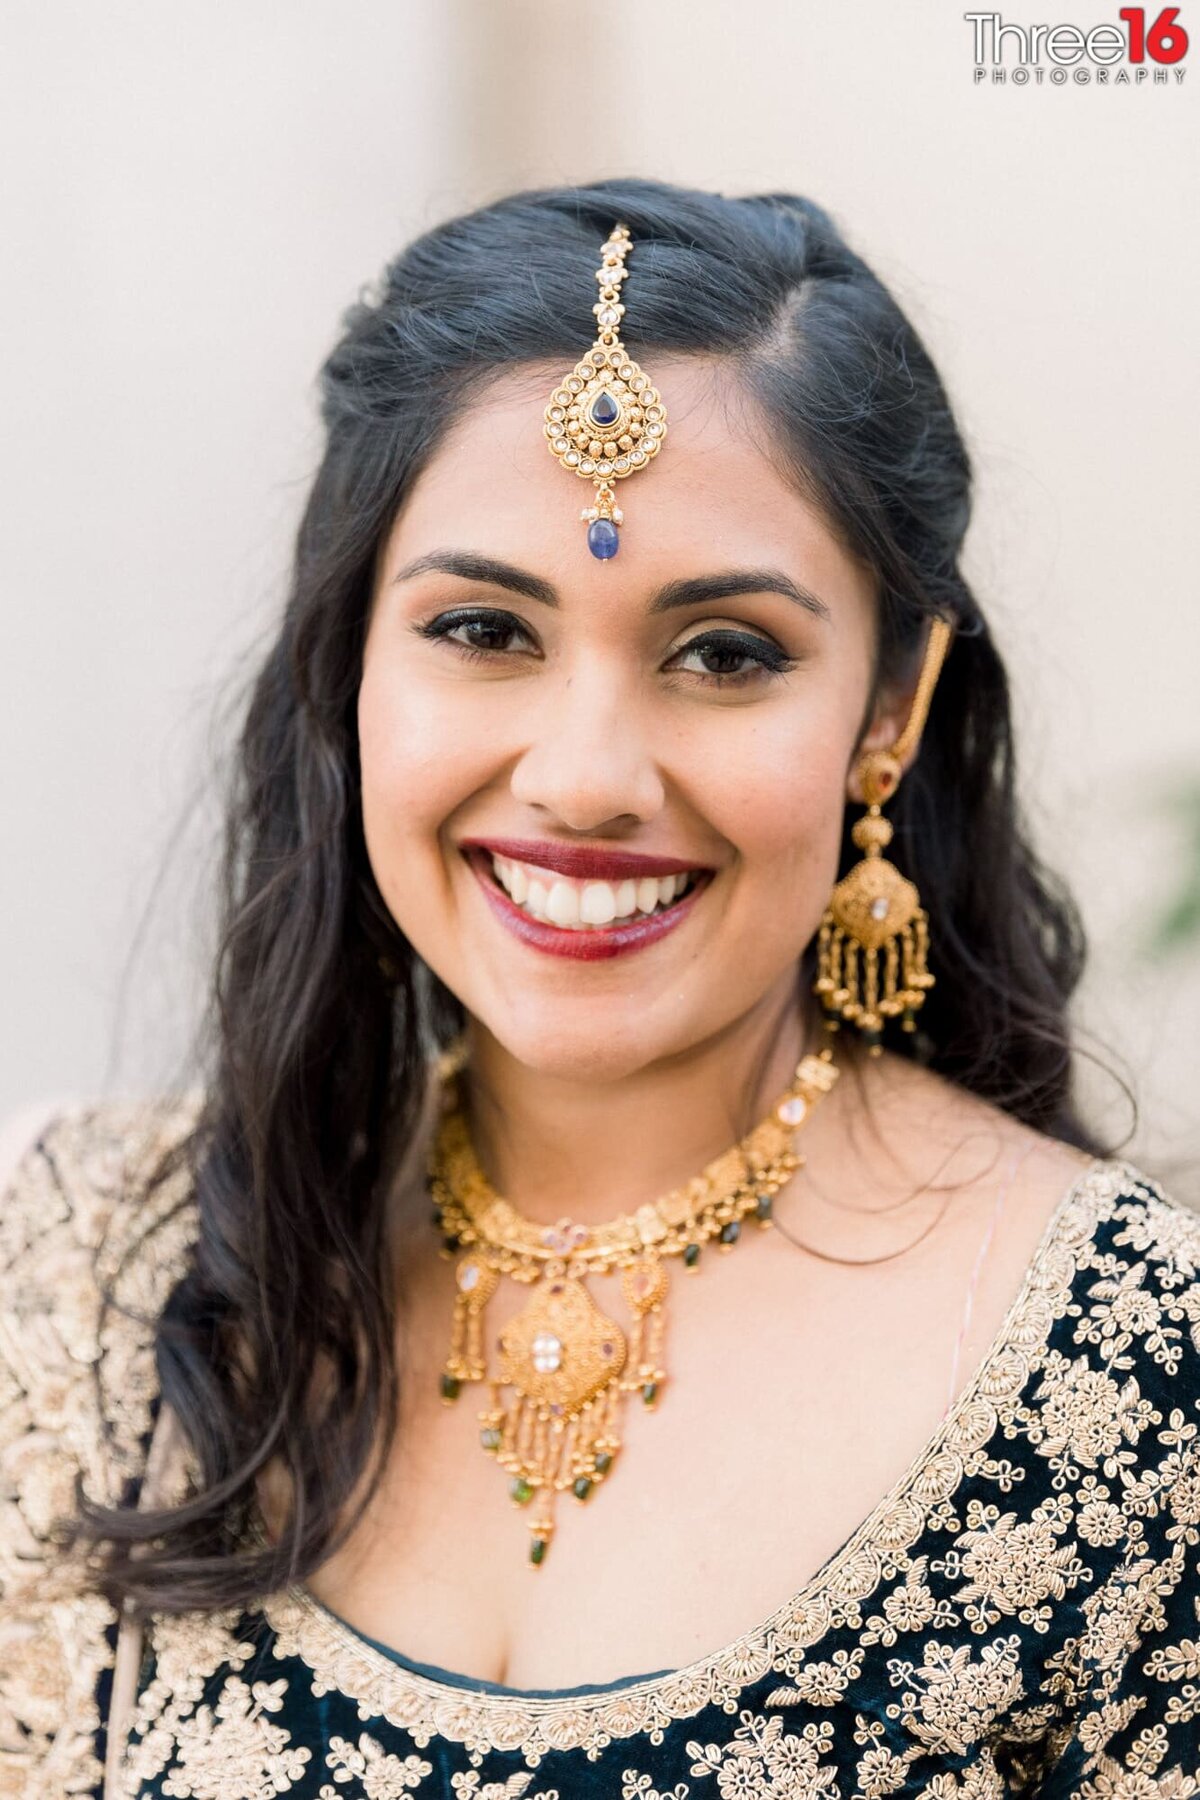 Decked out in a traditional Indian head dress Bride flashes a big smile for the wedding photographer